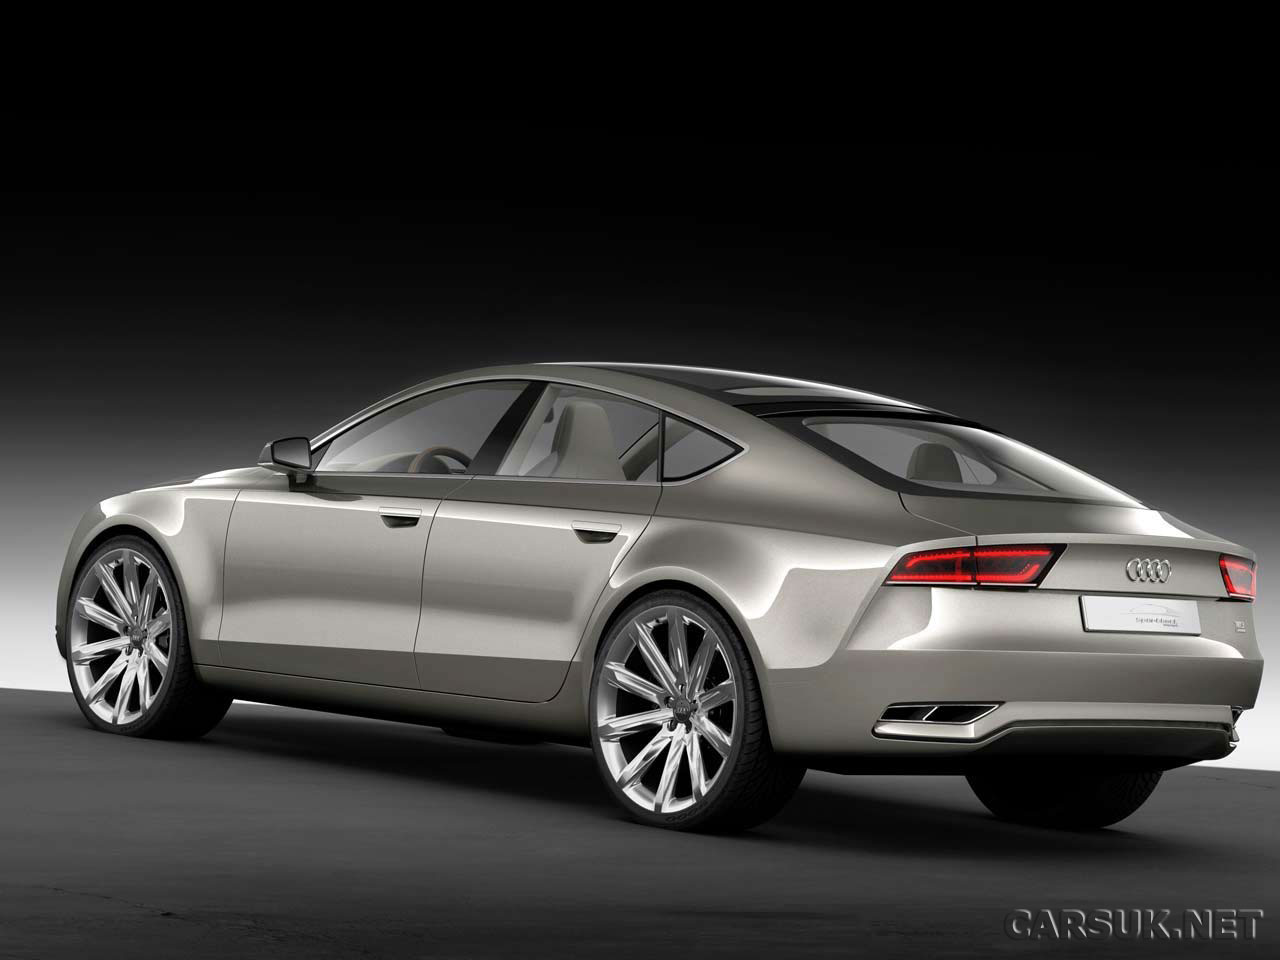 Audi A7 Concept Photo Image Gallery